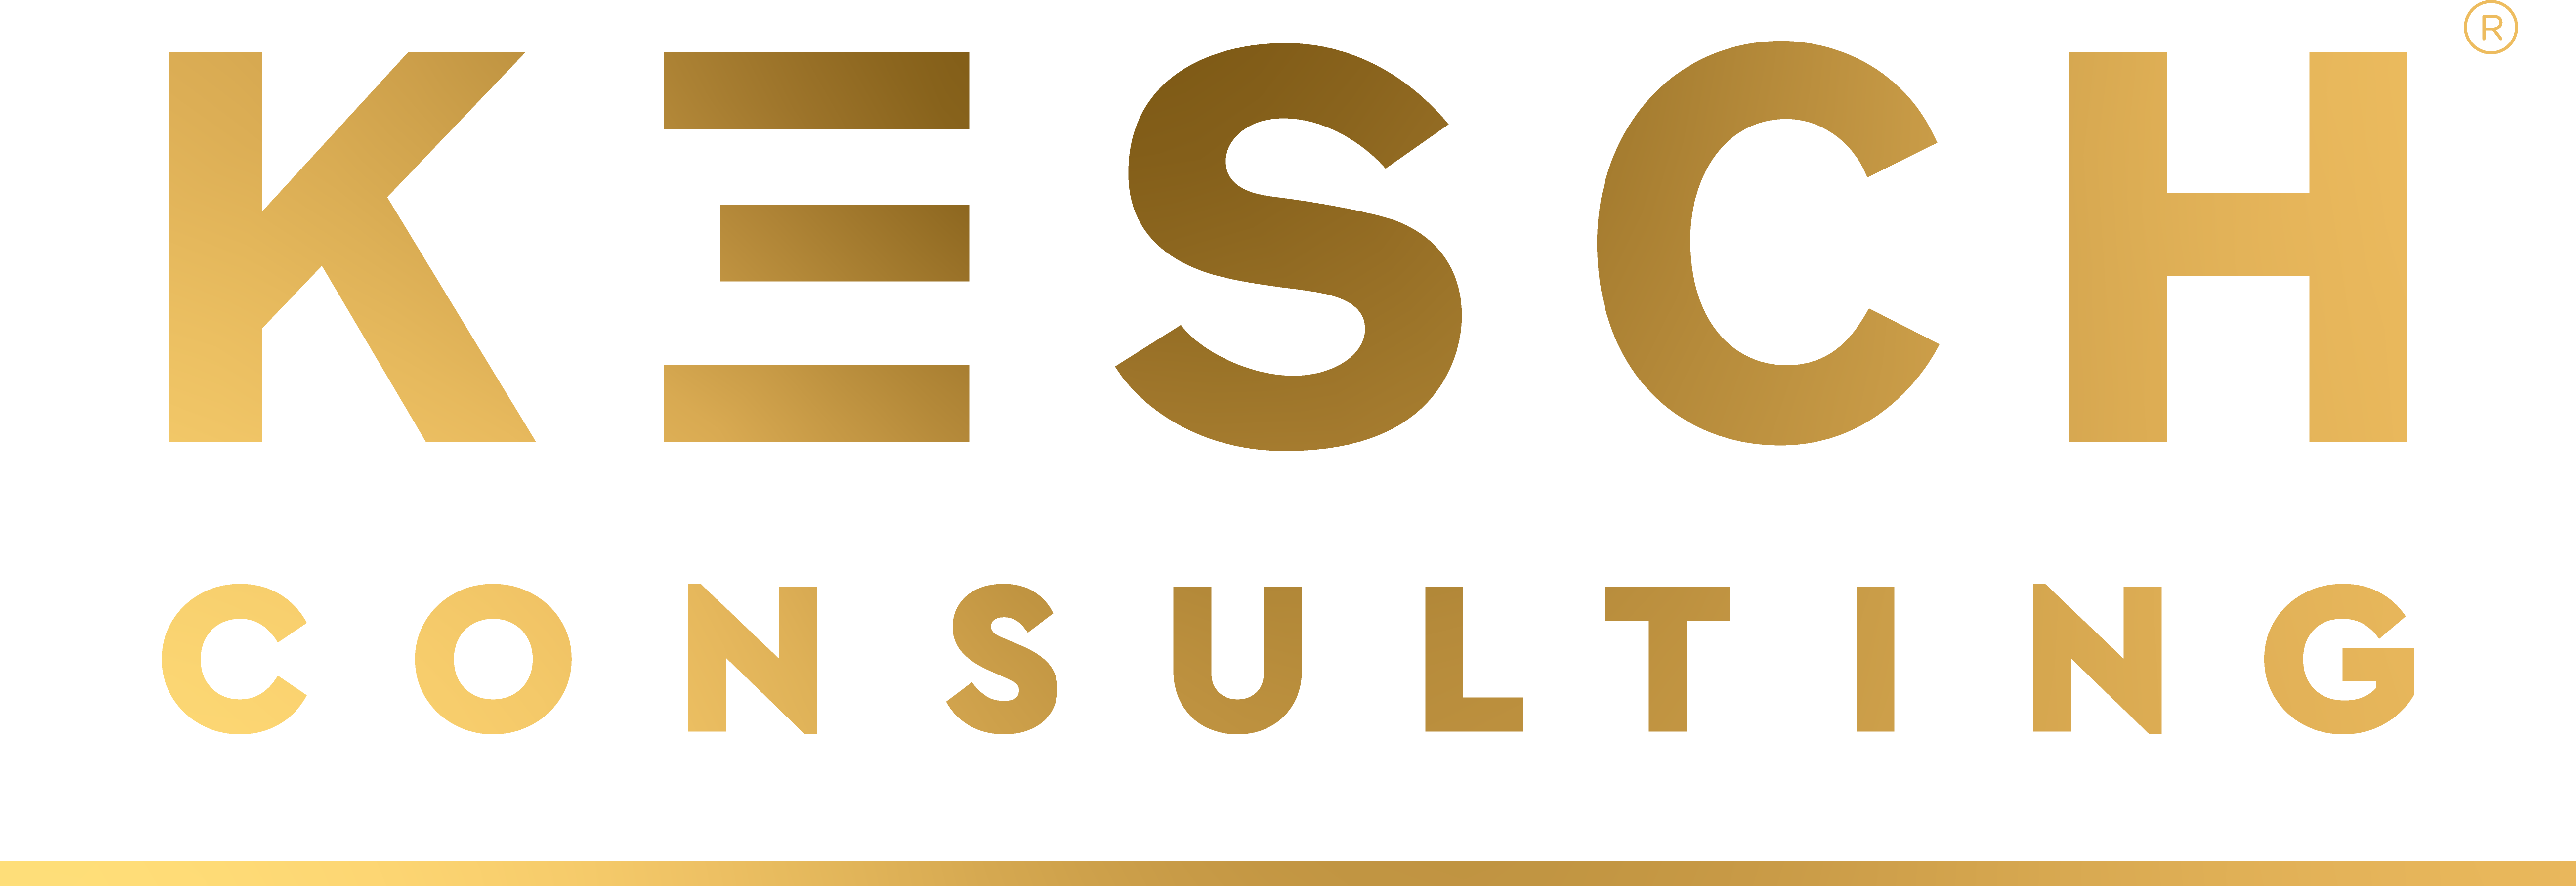 KESCH Consulting